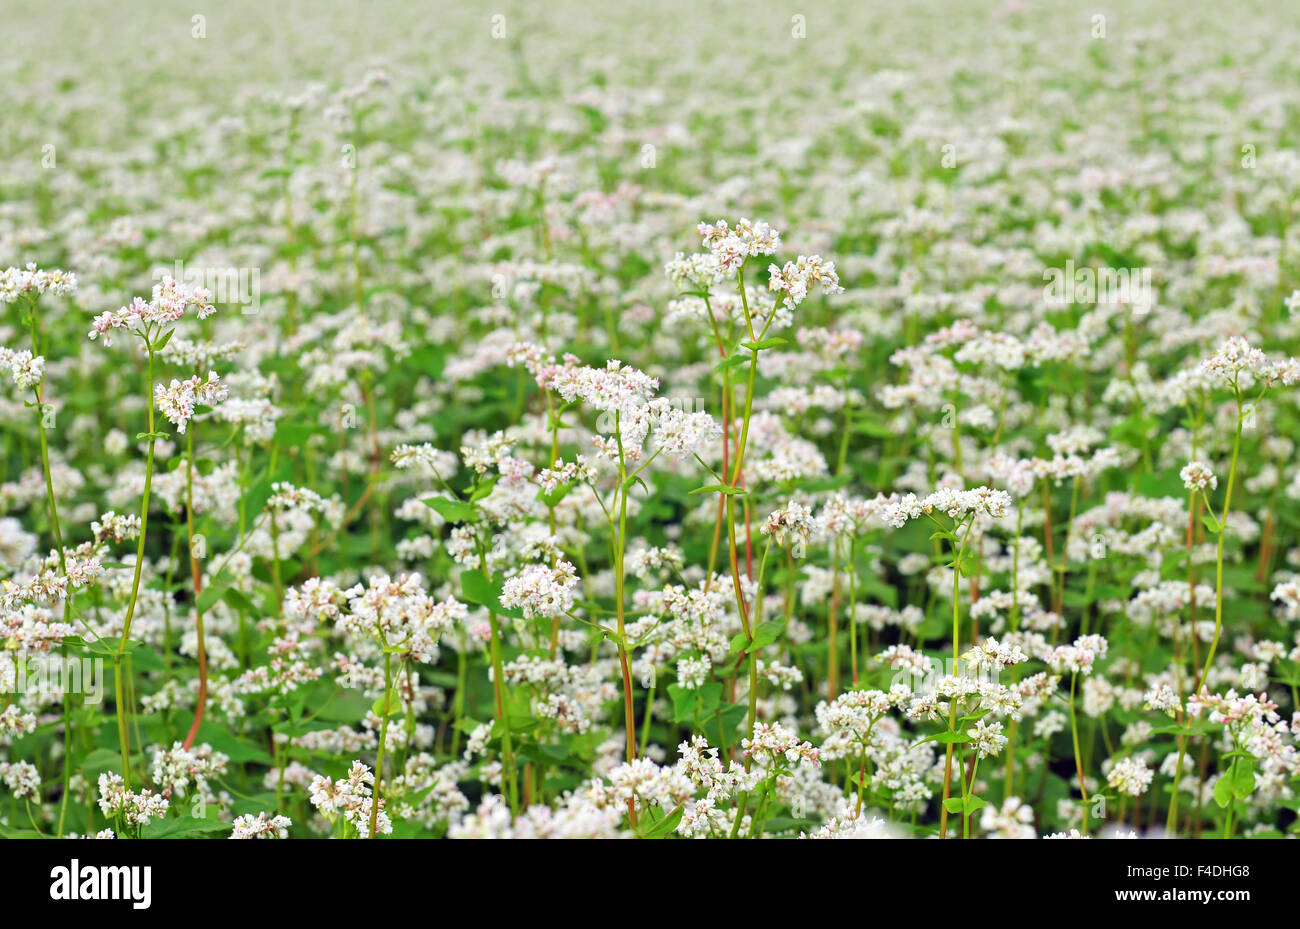 Field of buckwheat with a white blossoms Stock Photo